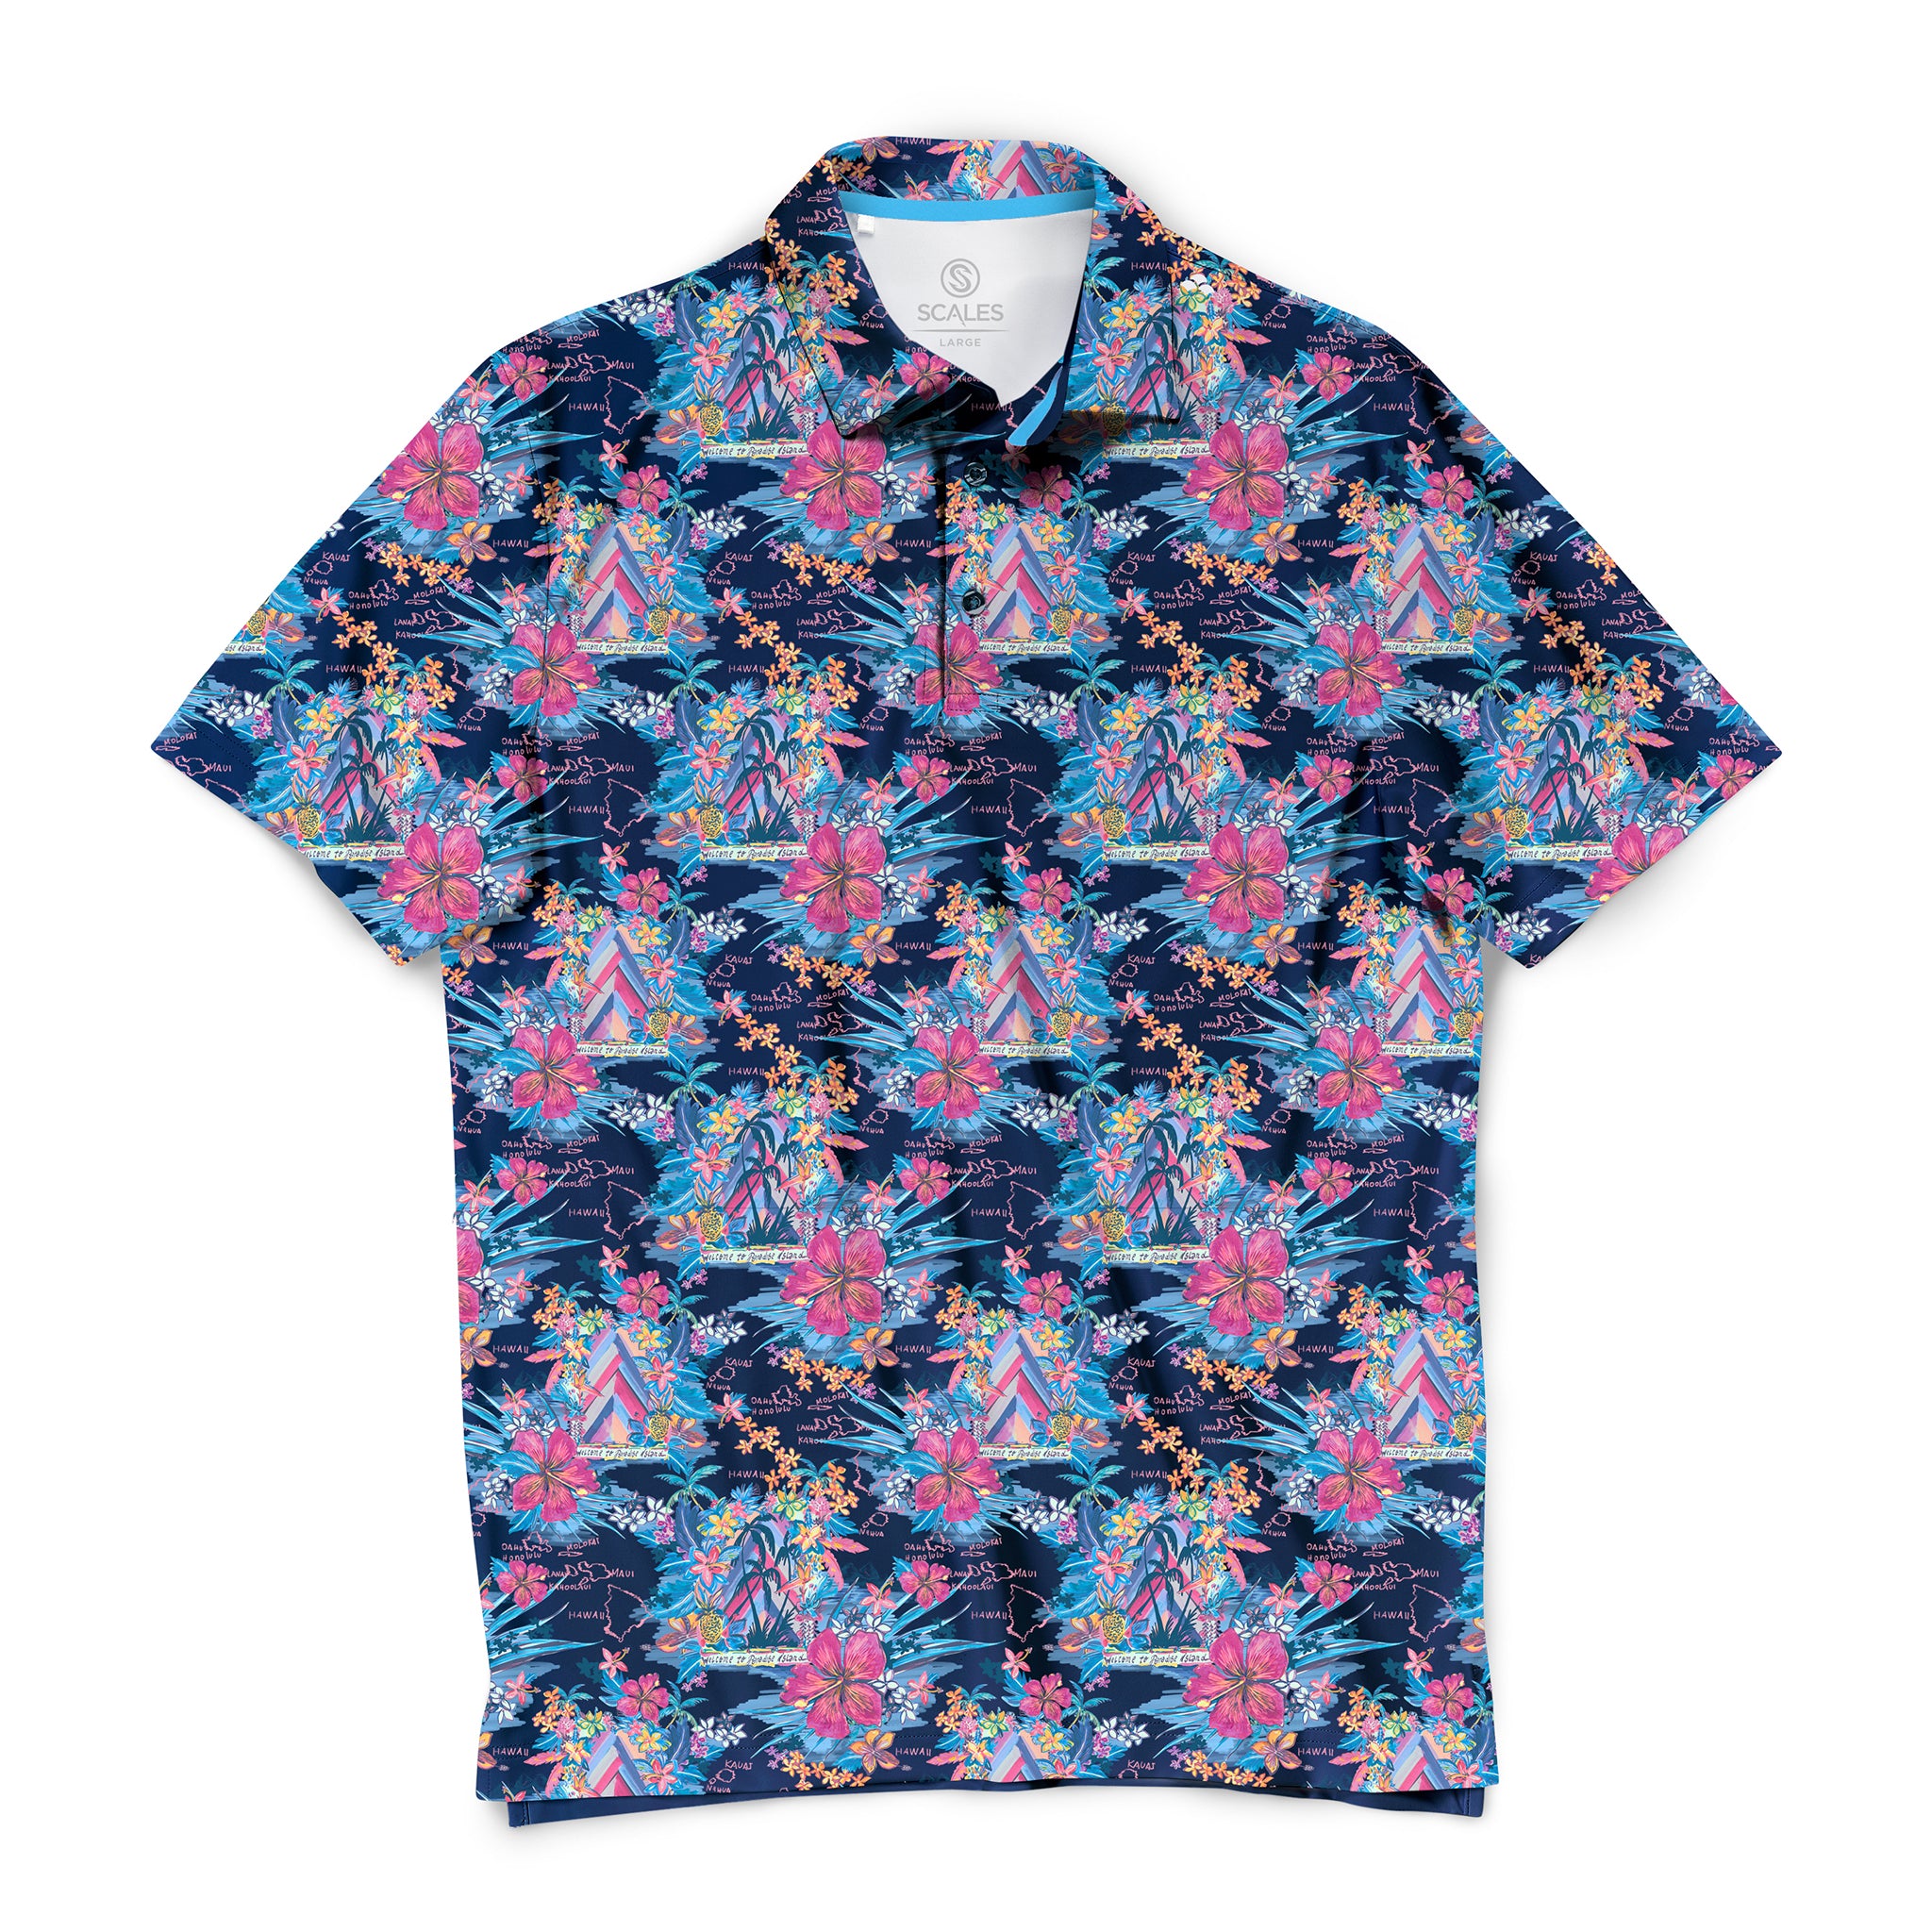 Scales Ohana Polo in Navy Size 3XL